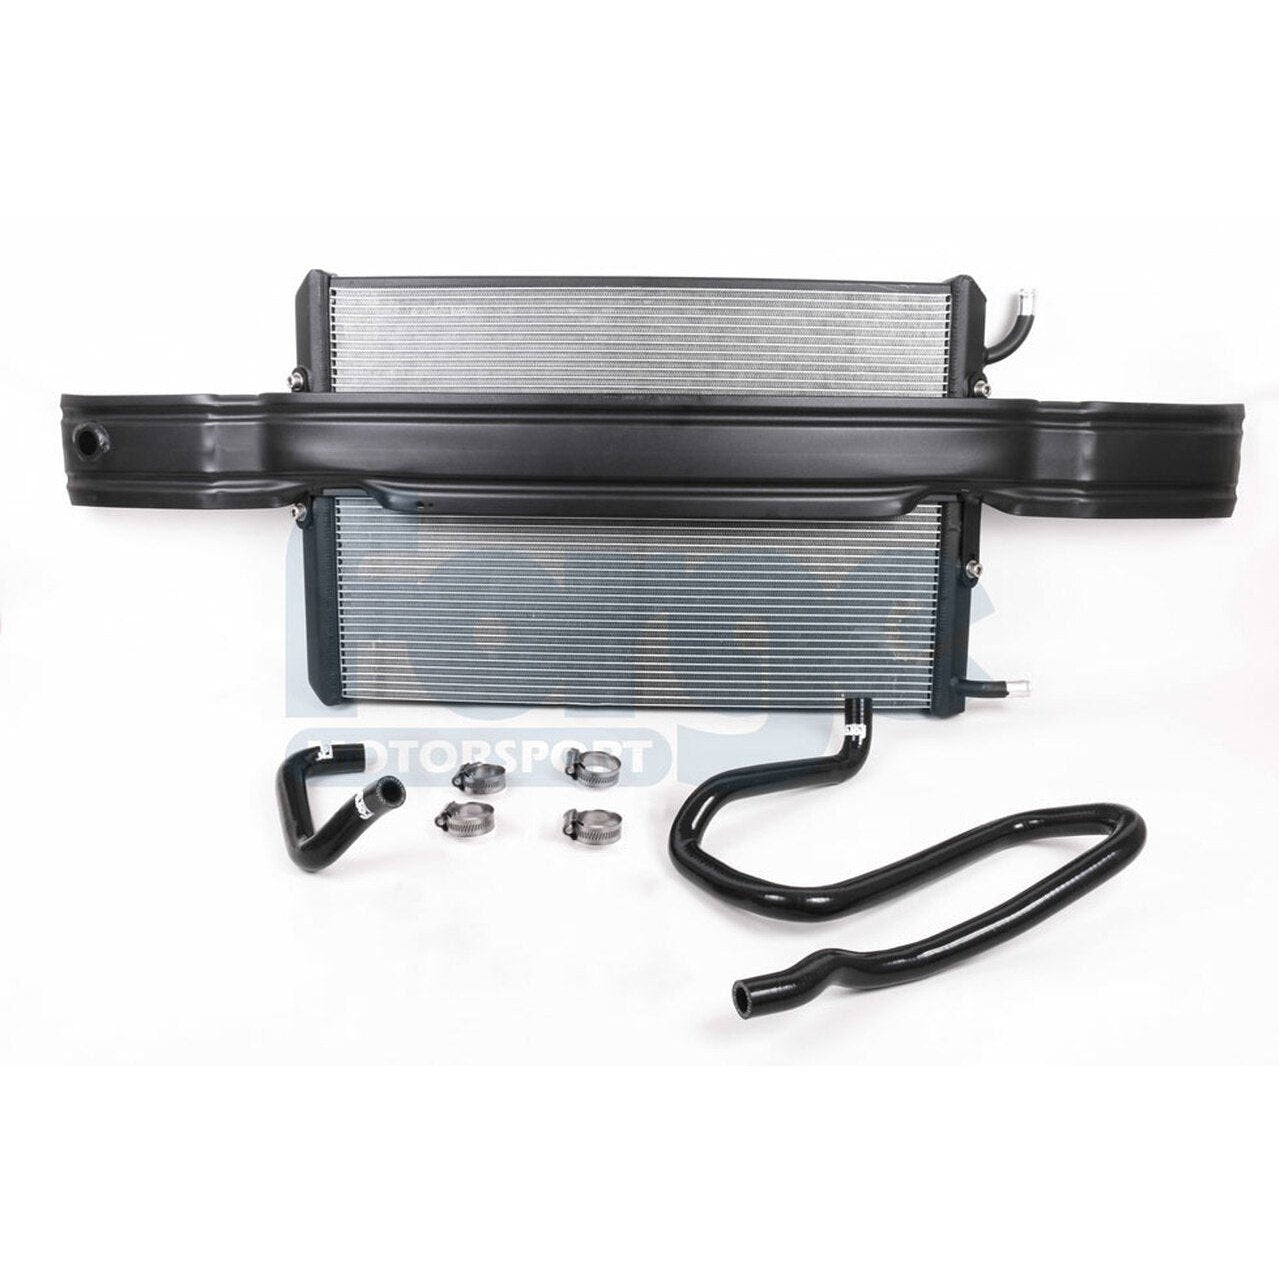 Forge Chargecooler Radiator Upgrade – Audi RS6 and RS7 (C7)